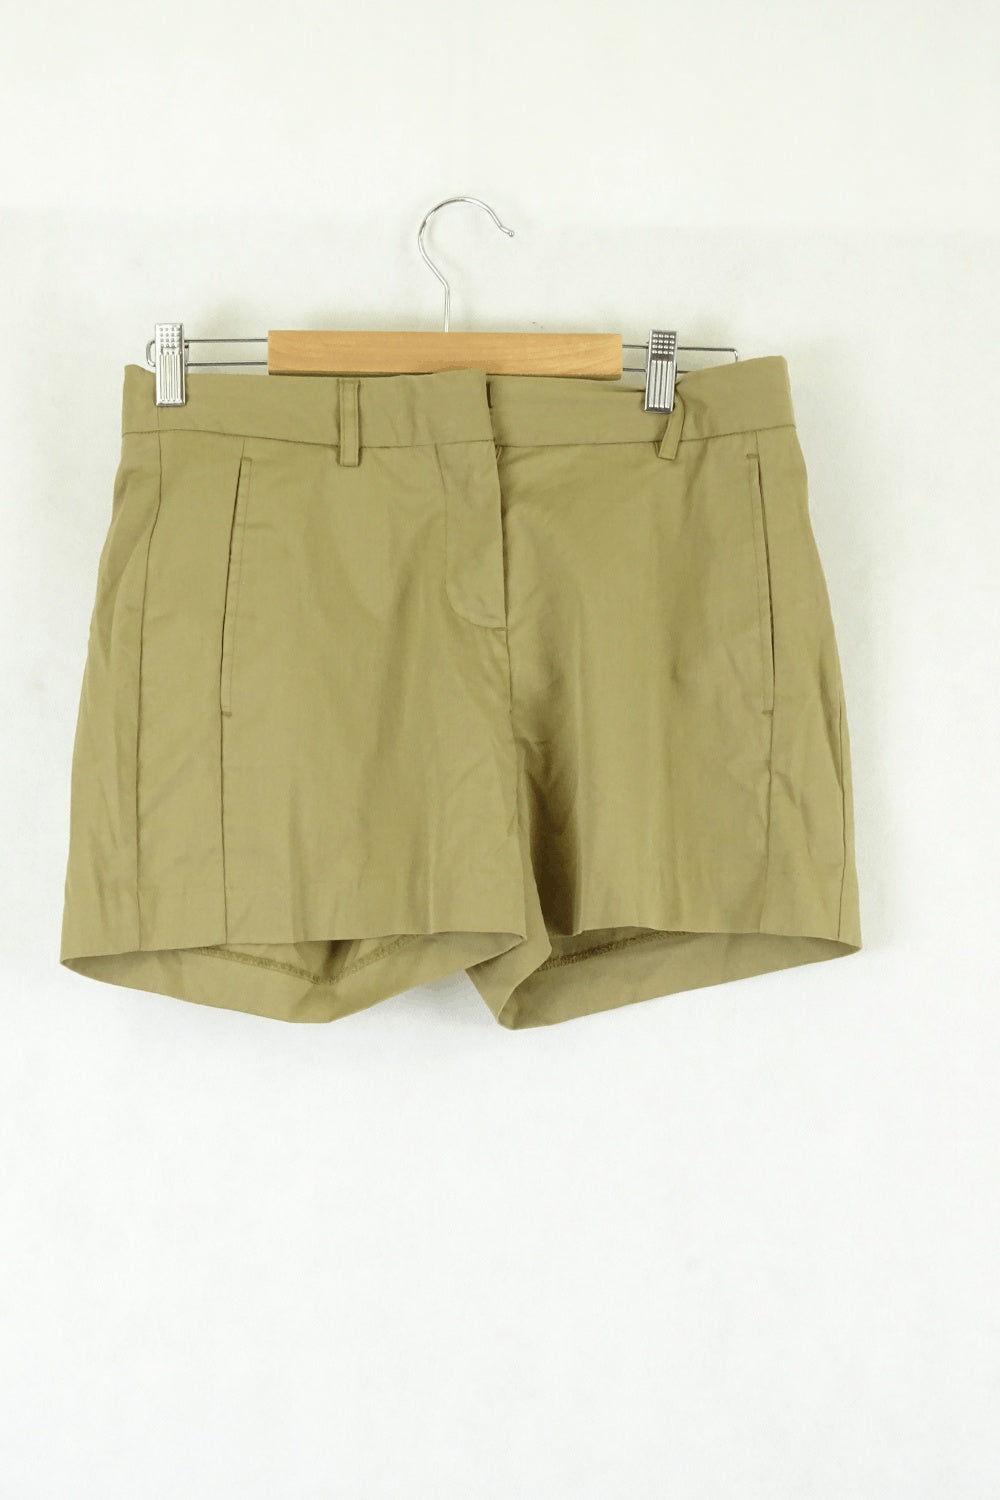 Witchery Brown Shorts 10